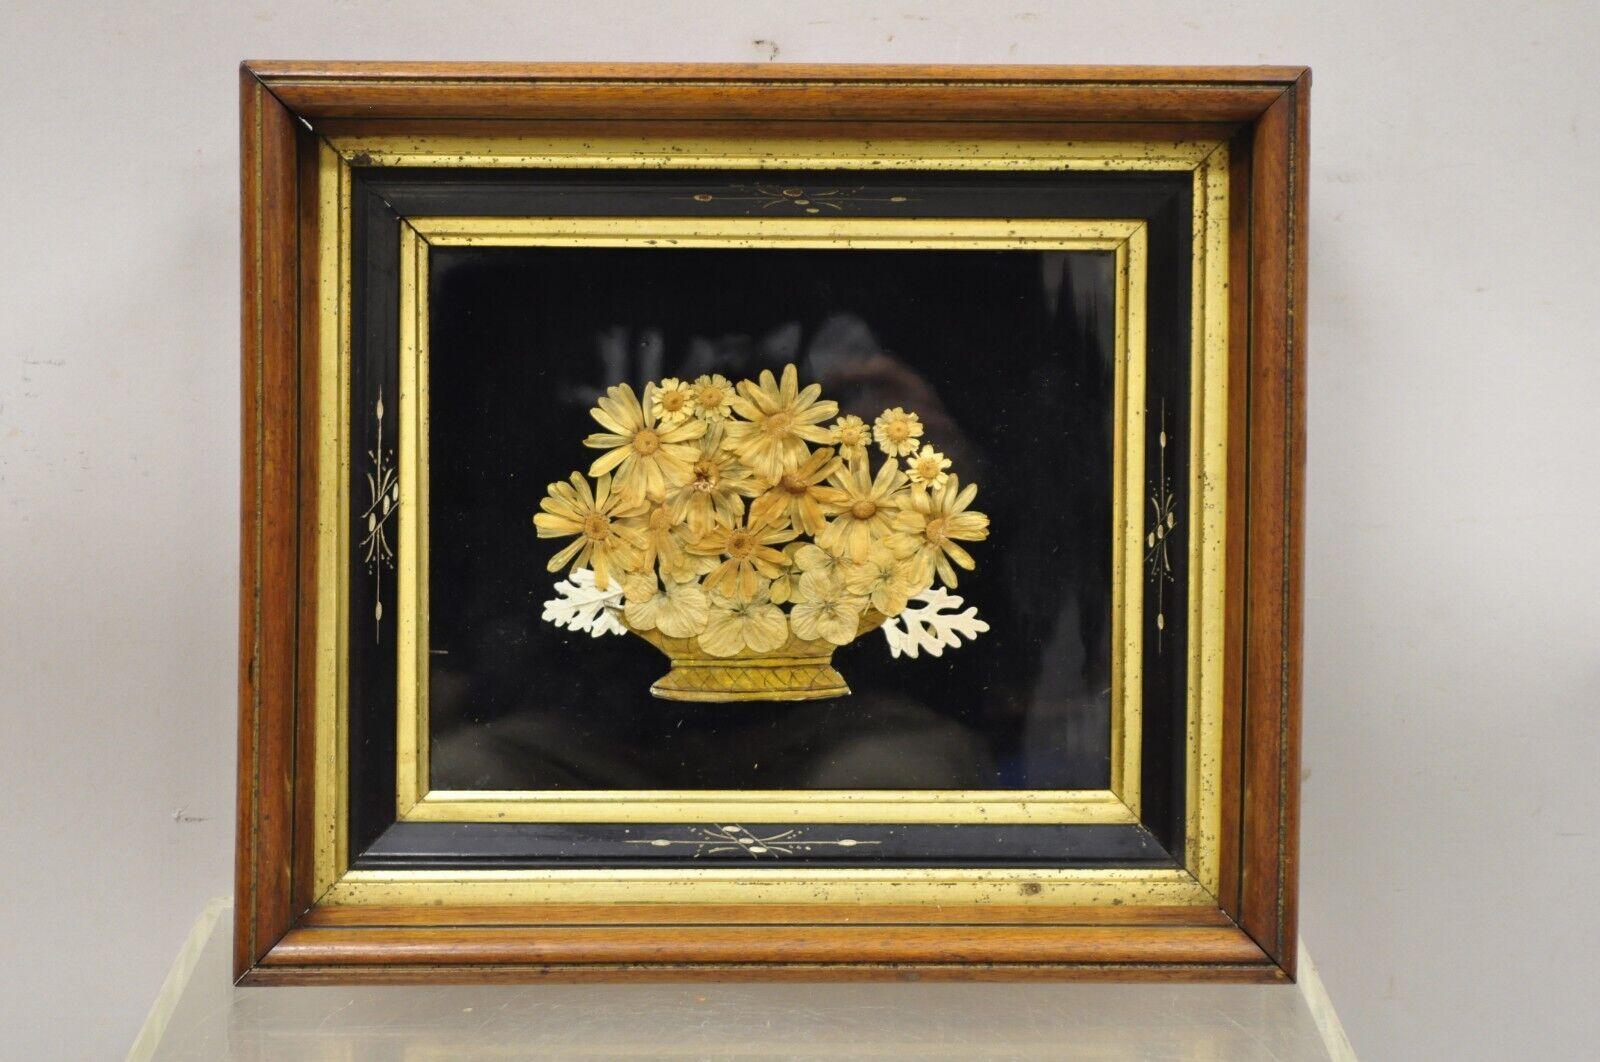 Antique Victorian Dried Flowers Mourning Wreath mahogany shadow box frame Oddity. Item features dried flower arrangement, glass front, mahogany wood shadow box frame, gold gilt trim, very nice antique item. Circa 19th Century. Measurements: 12.5